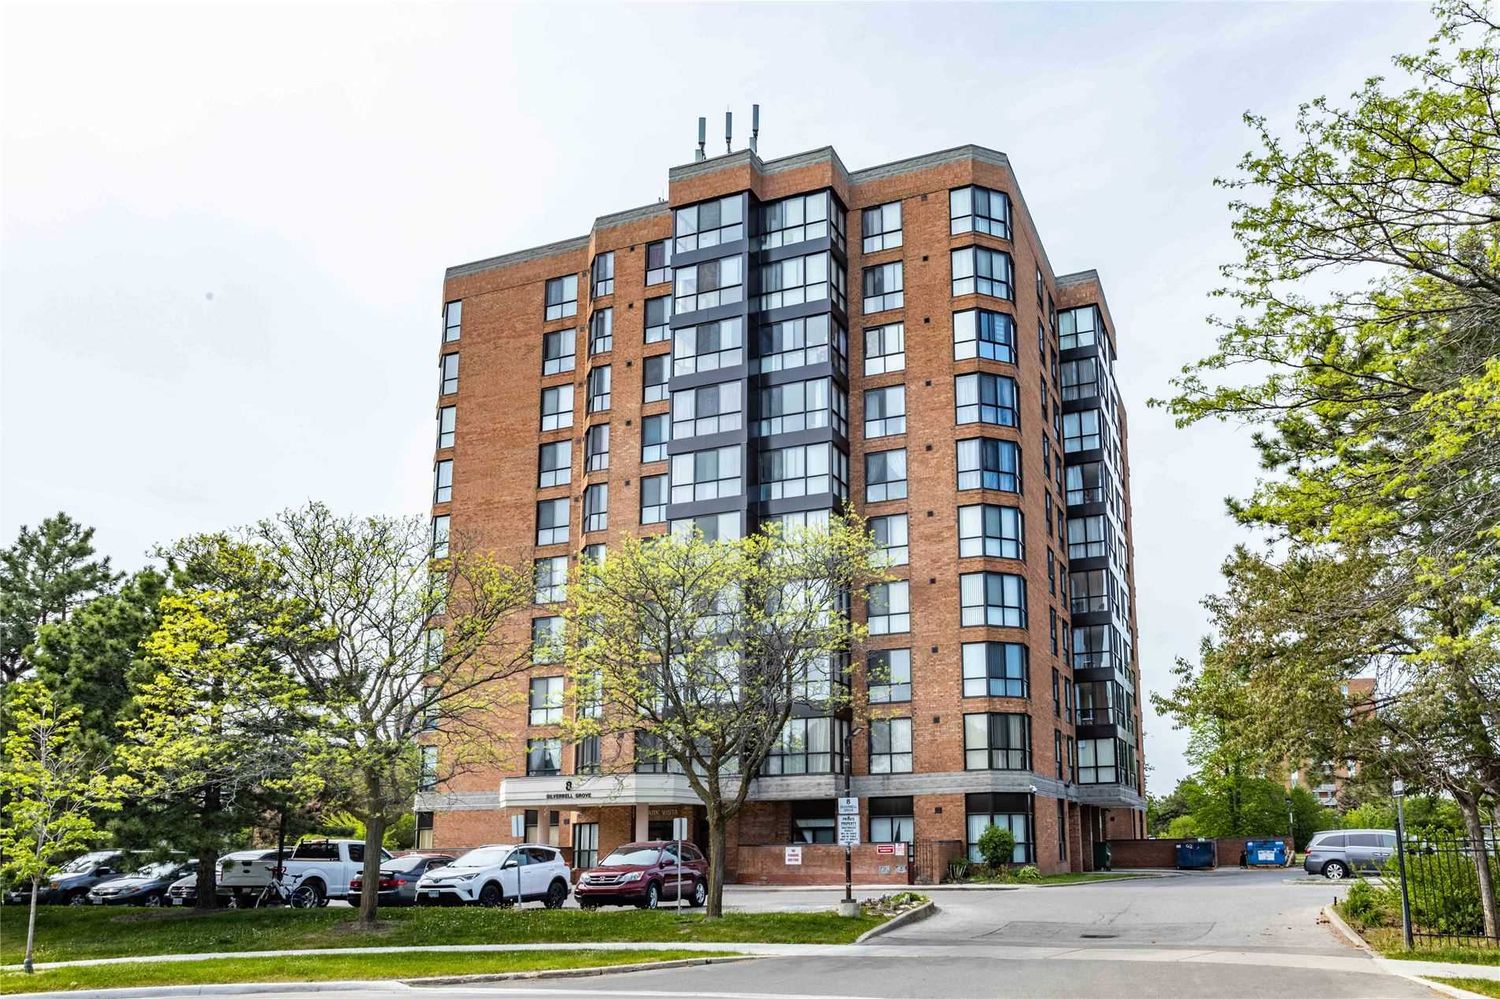 8 Silverbell Grve. Park Vista - Silverbell Grove Condos is located in  Scarborough, Toronto - image #1 of 2